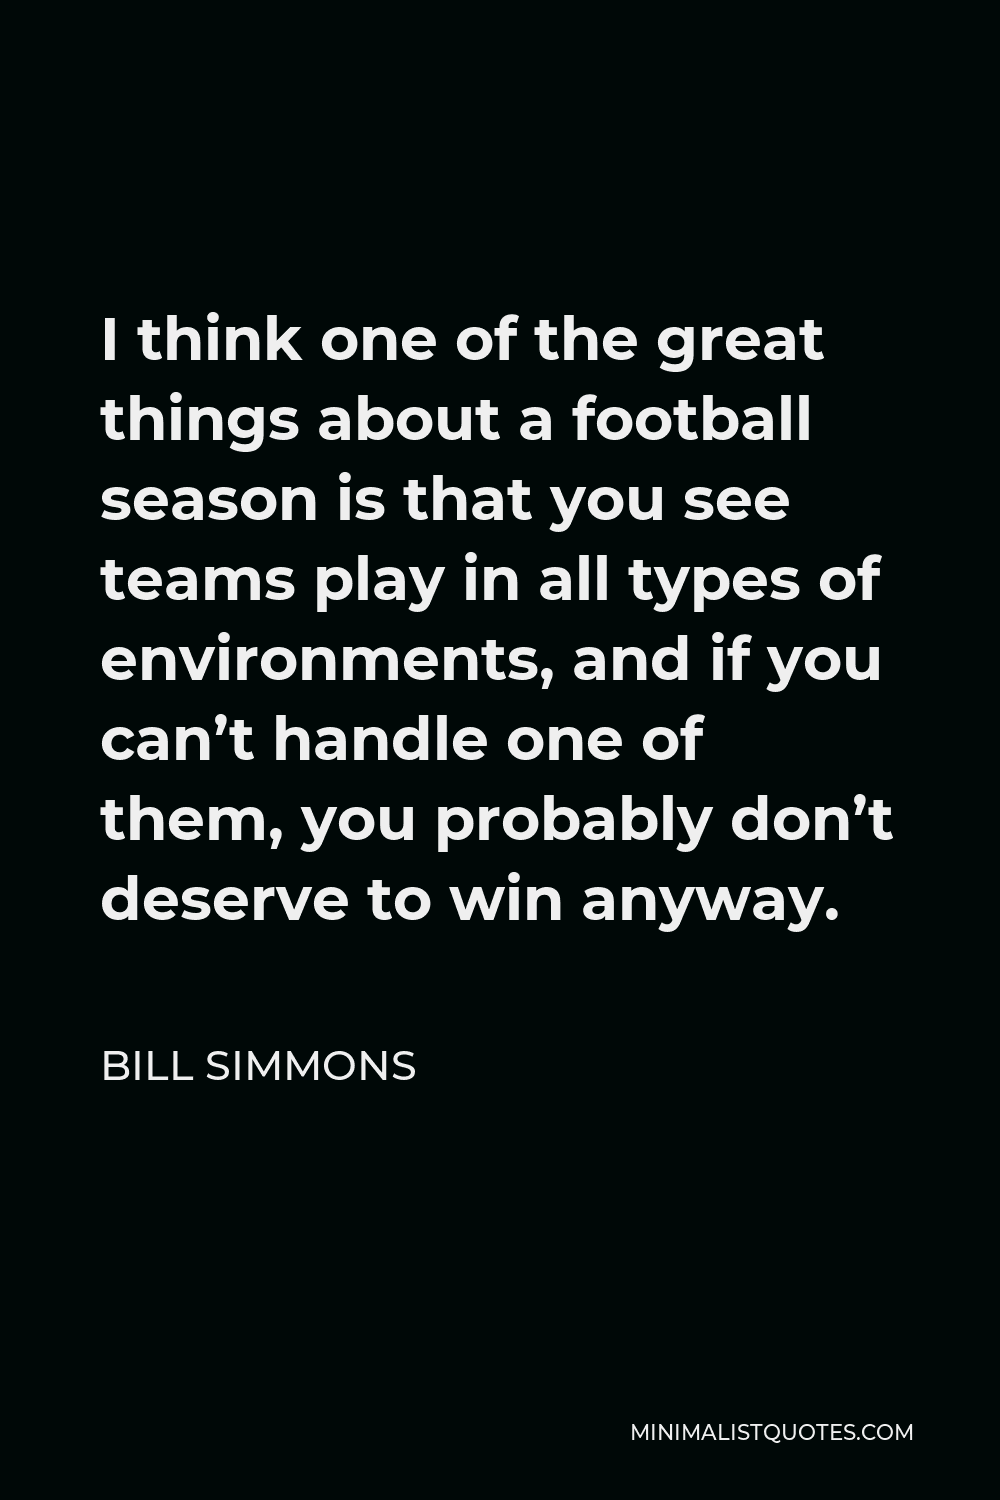 Bill Simmons Quote - I think one of the great things about a football season is that you see teams play in all types of environments, and if you can’t handle one of them, you probably don’t deserve to win anyway.